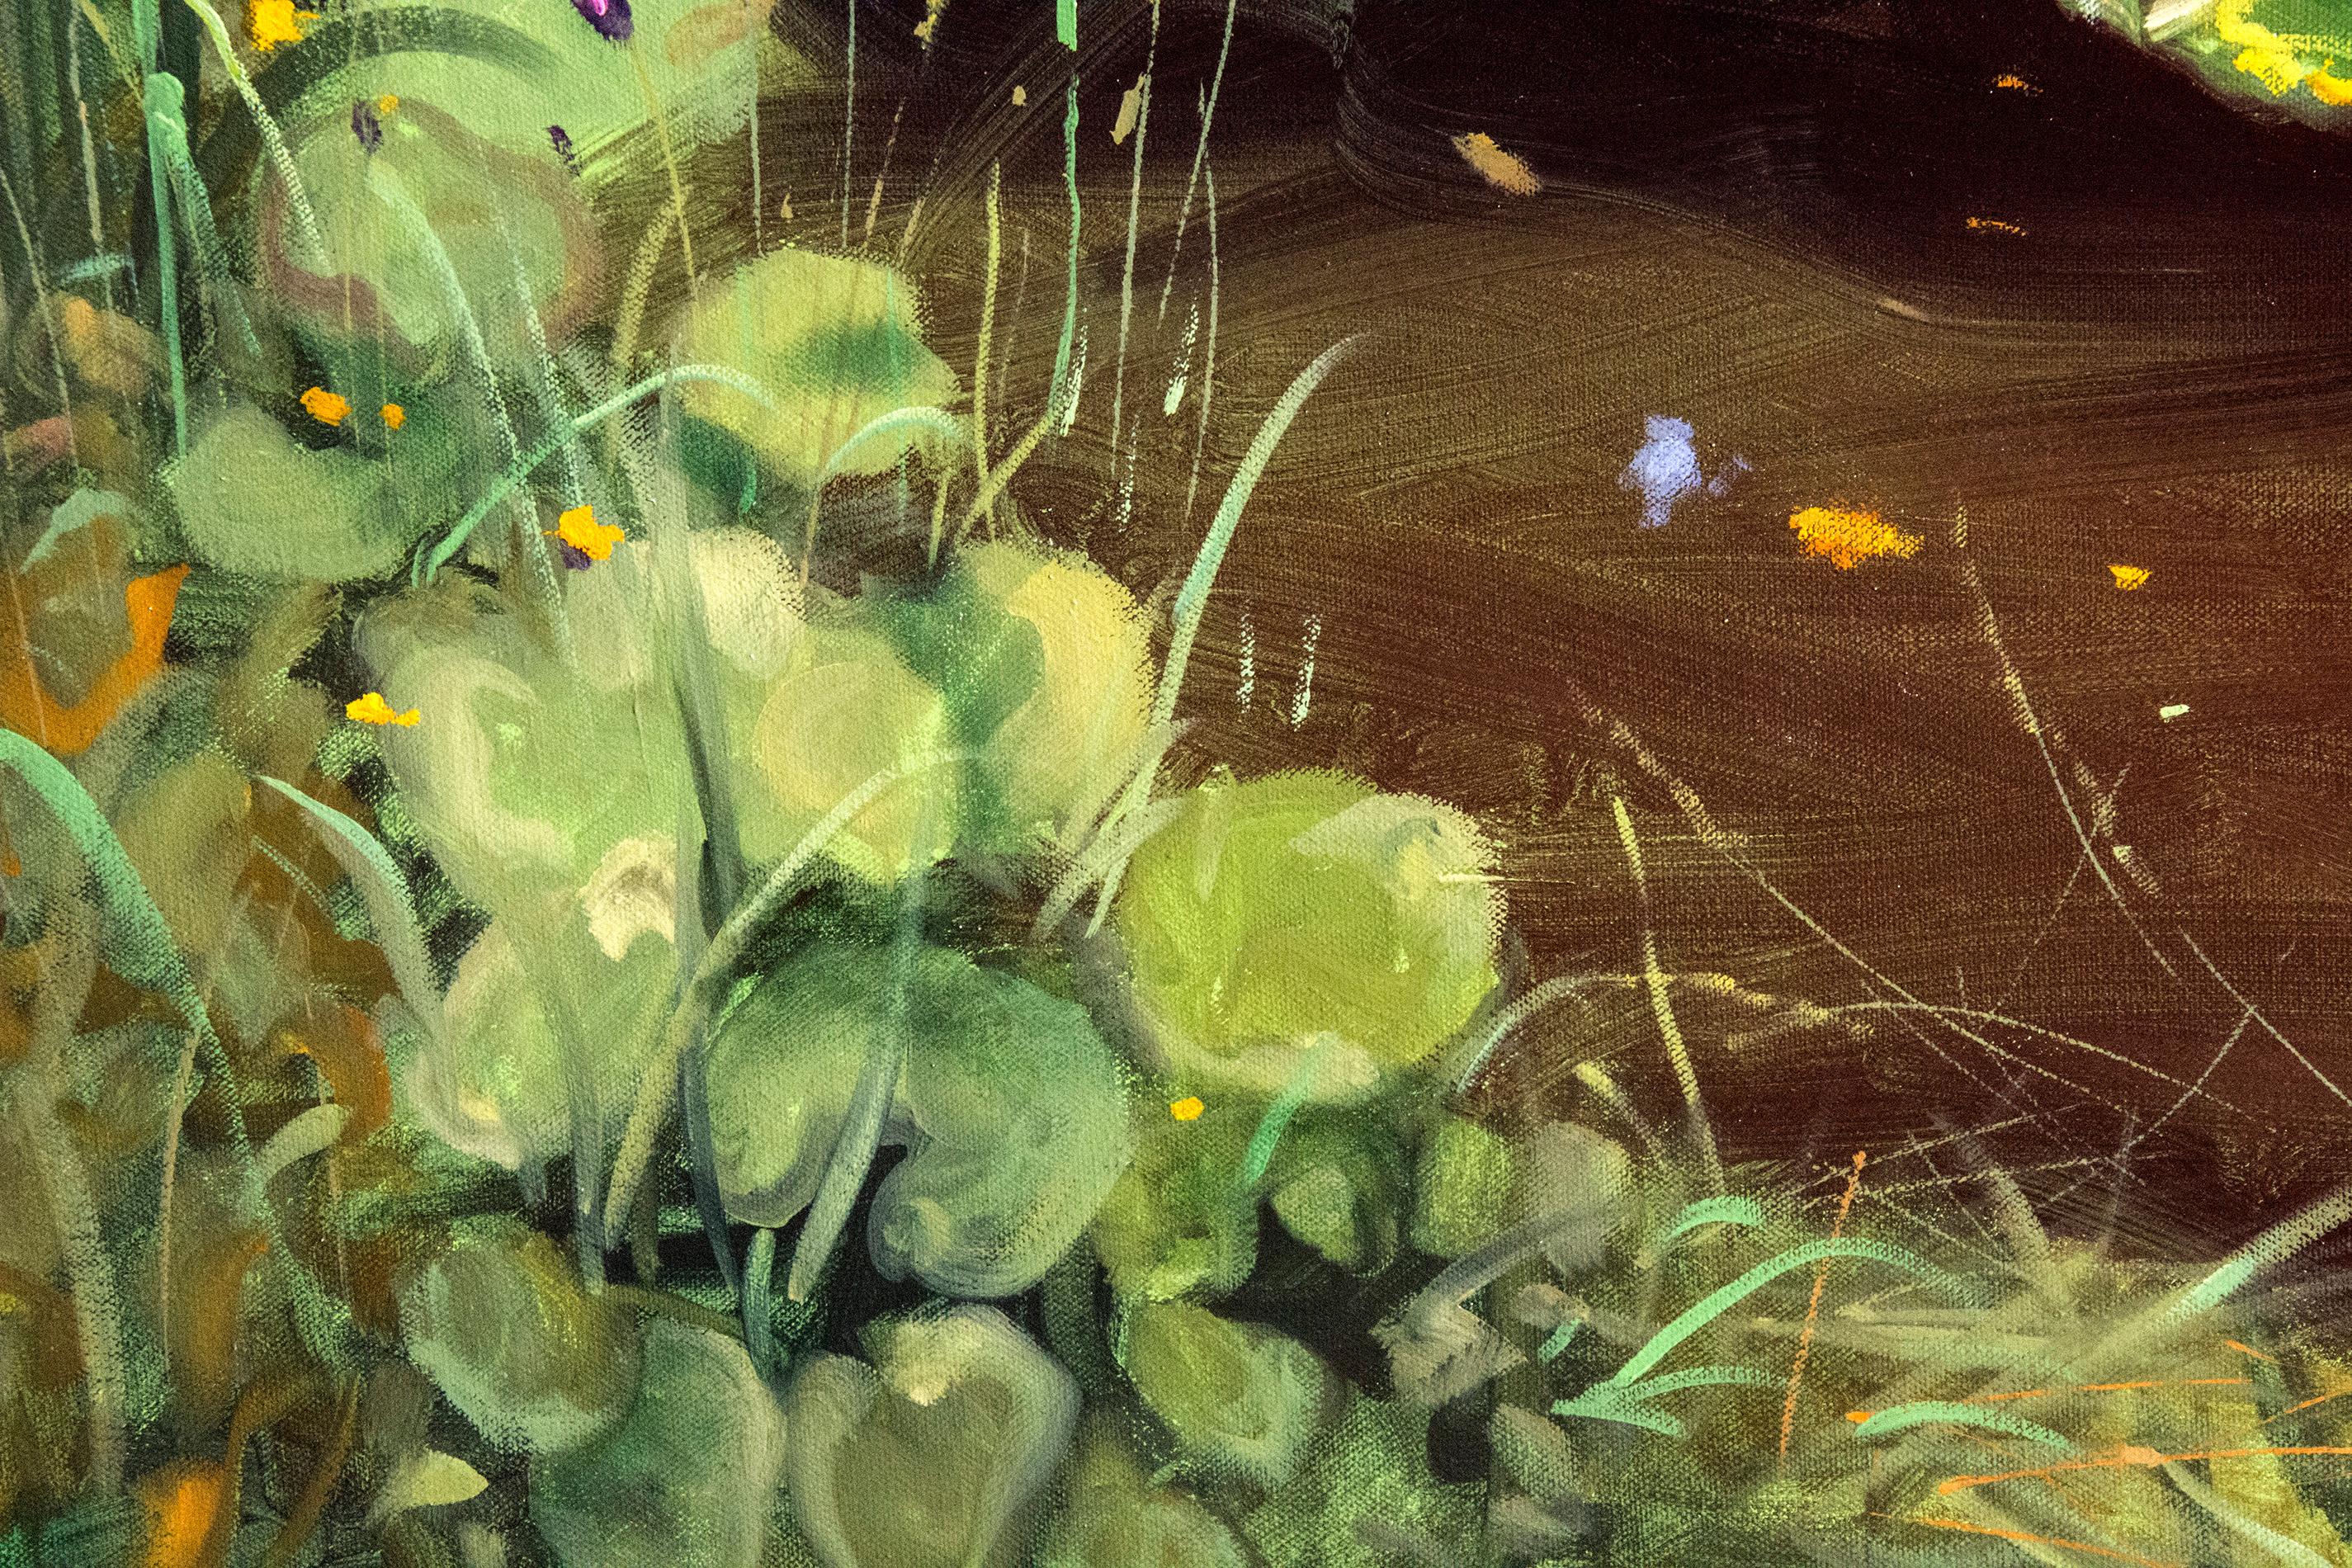 Green Harmony - colorful, detail, realist, floral, landscape, oil on canvas - Realist Painting by Ciba Karisik